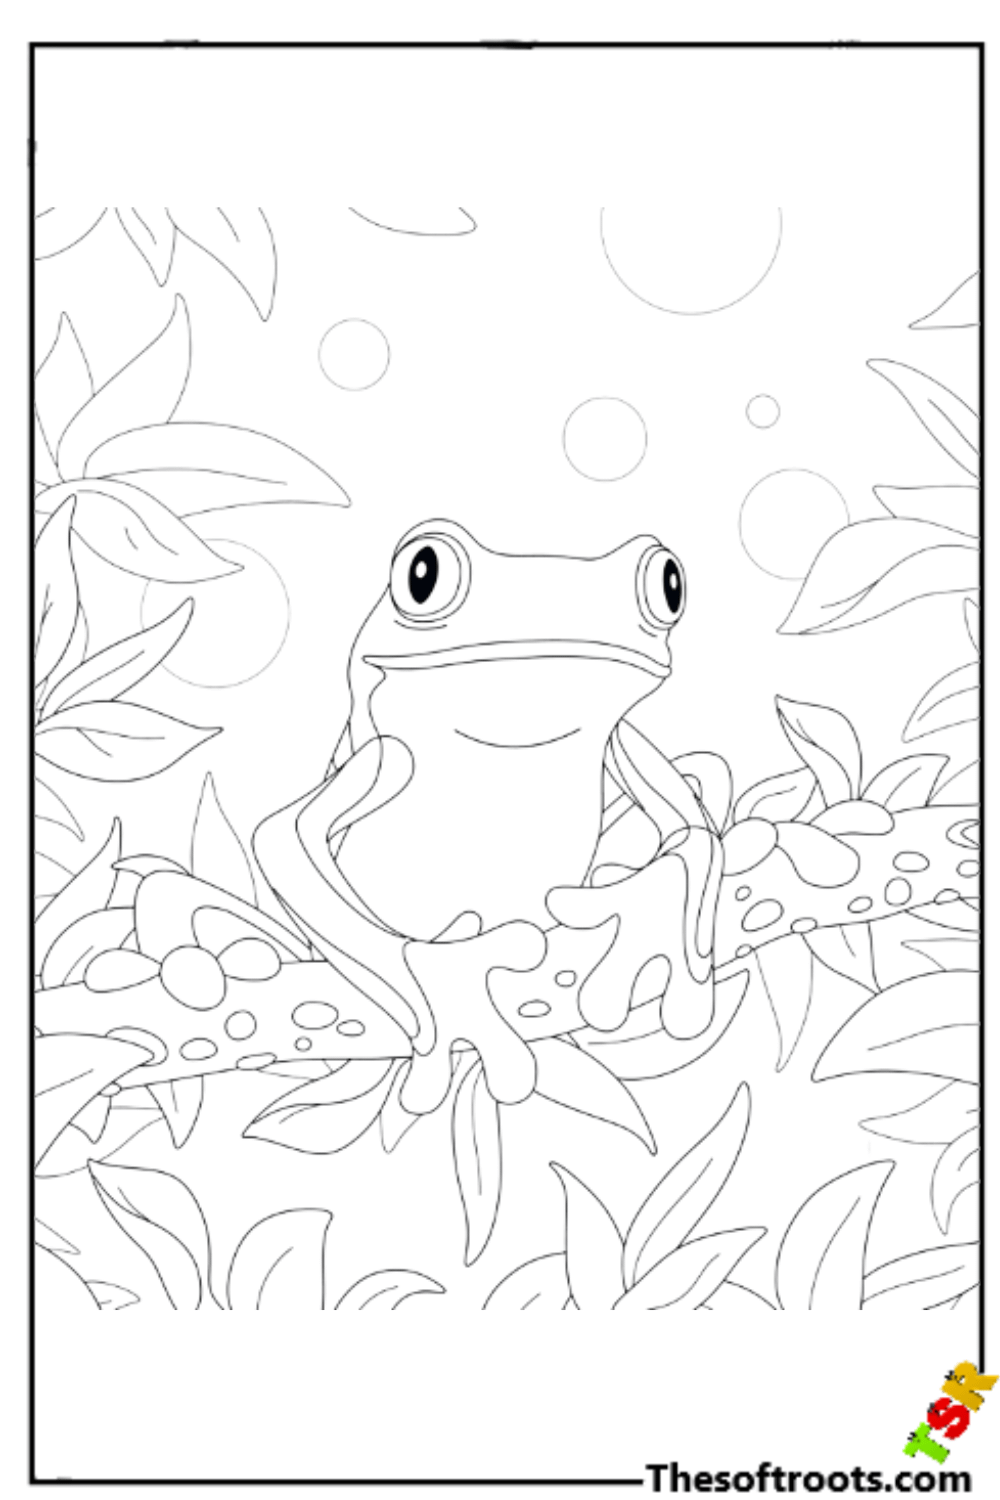 Frog coloring pages rkidscoloringpages